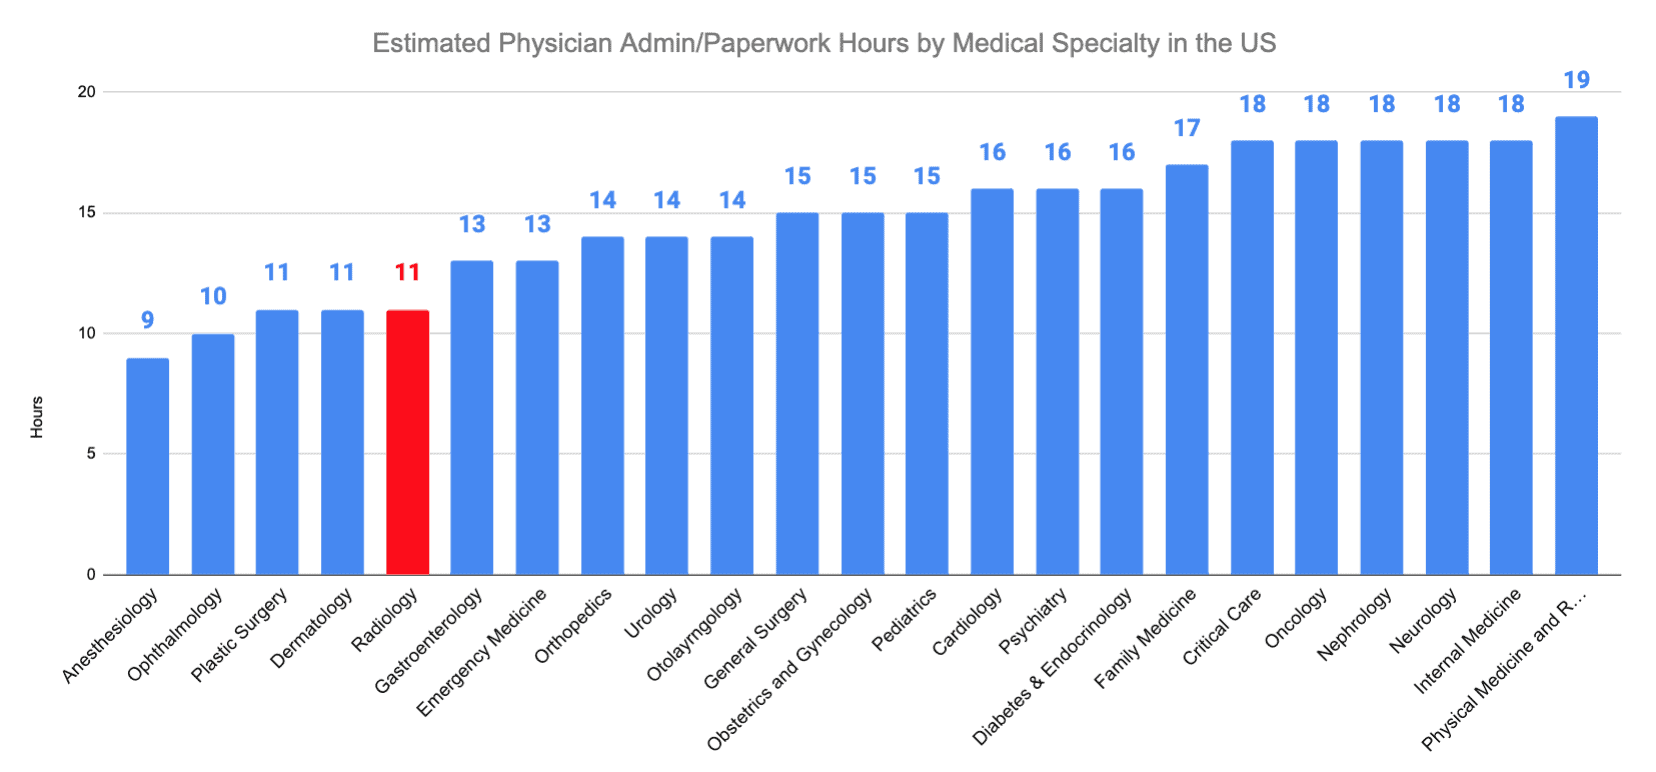 Radiology vs. Rheumatology Estimated Physician Admin/Paperwork Hours by Medical Specialty in the US